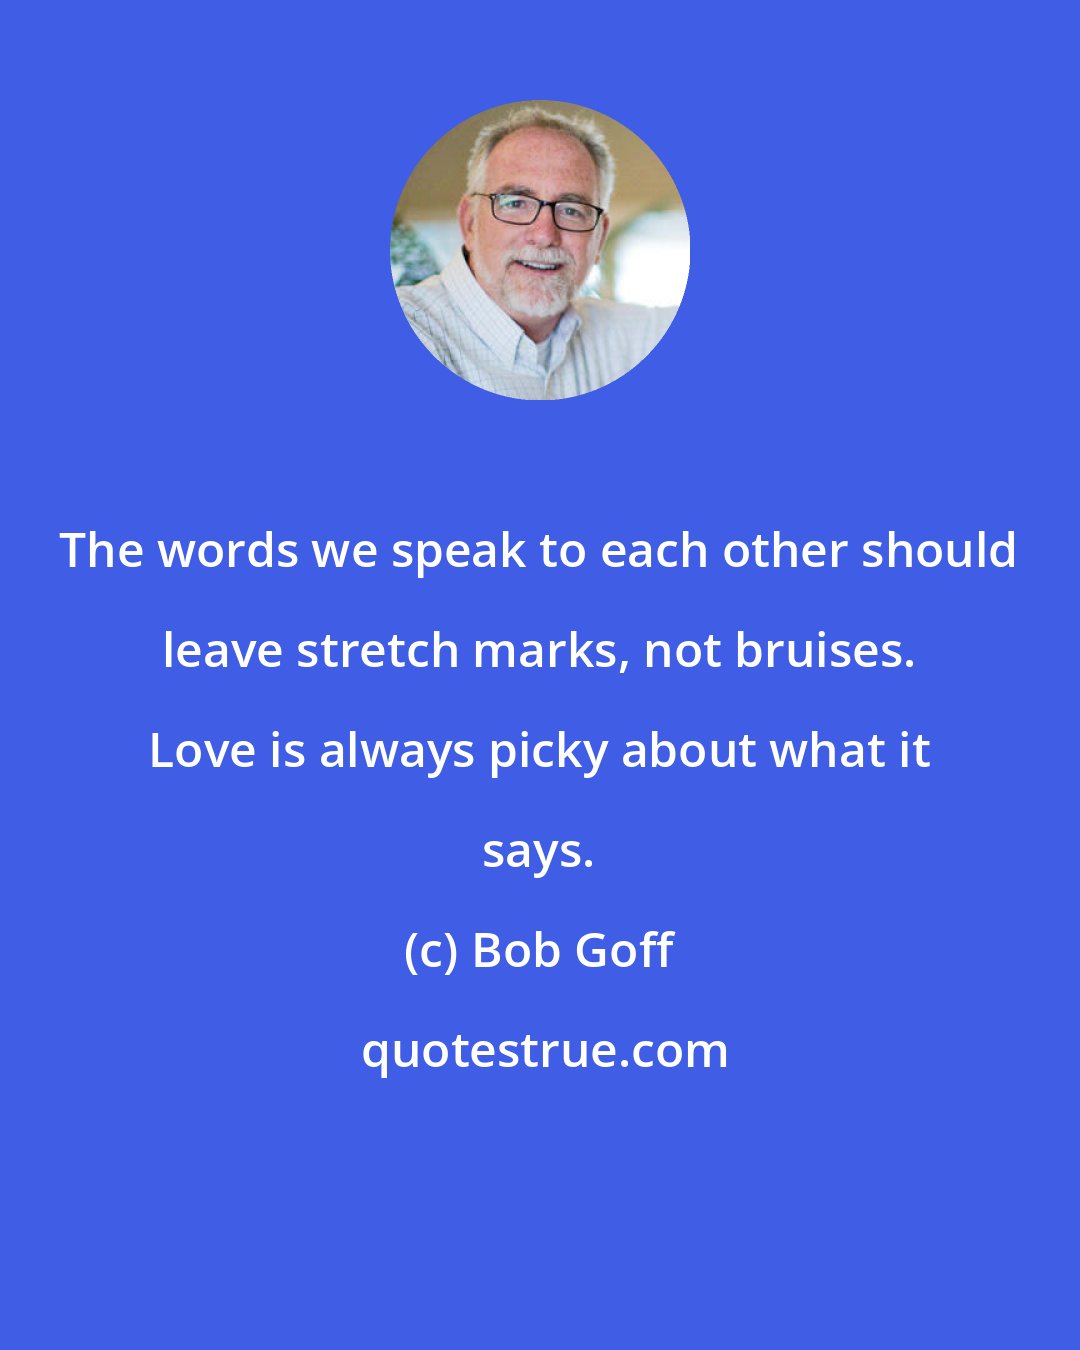 Bob Goff: The words we speak to each other should leave stretch marks, not bruises. Love is always picky about what it says.